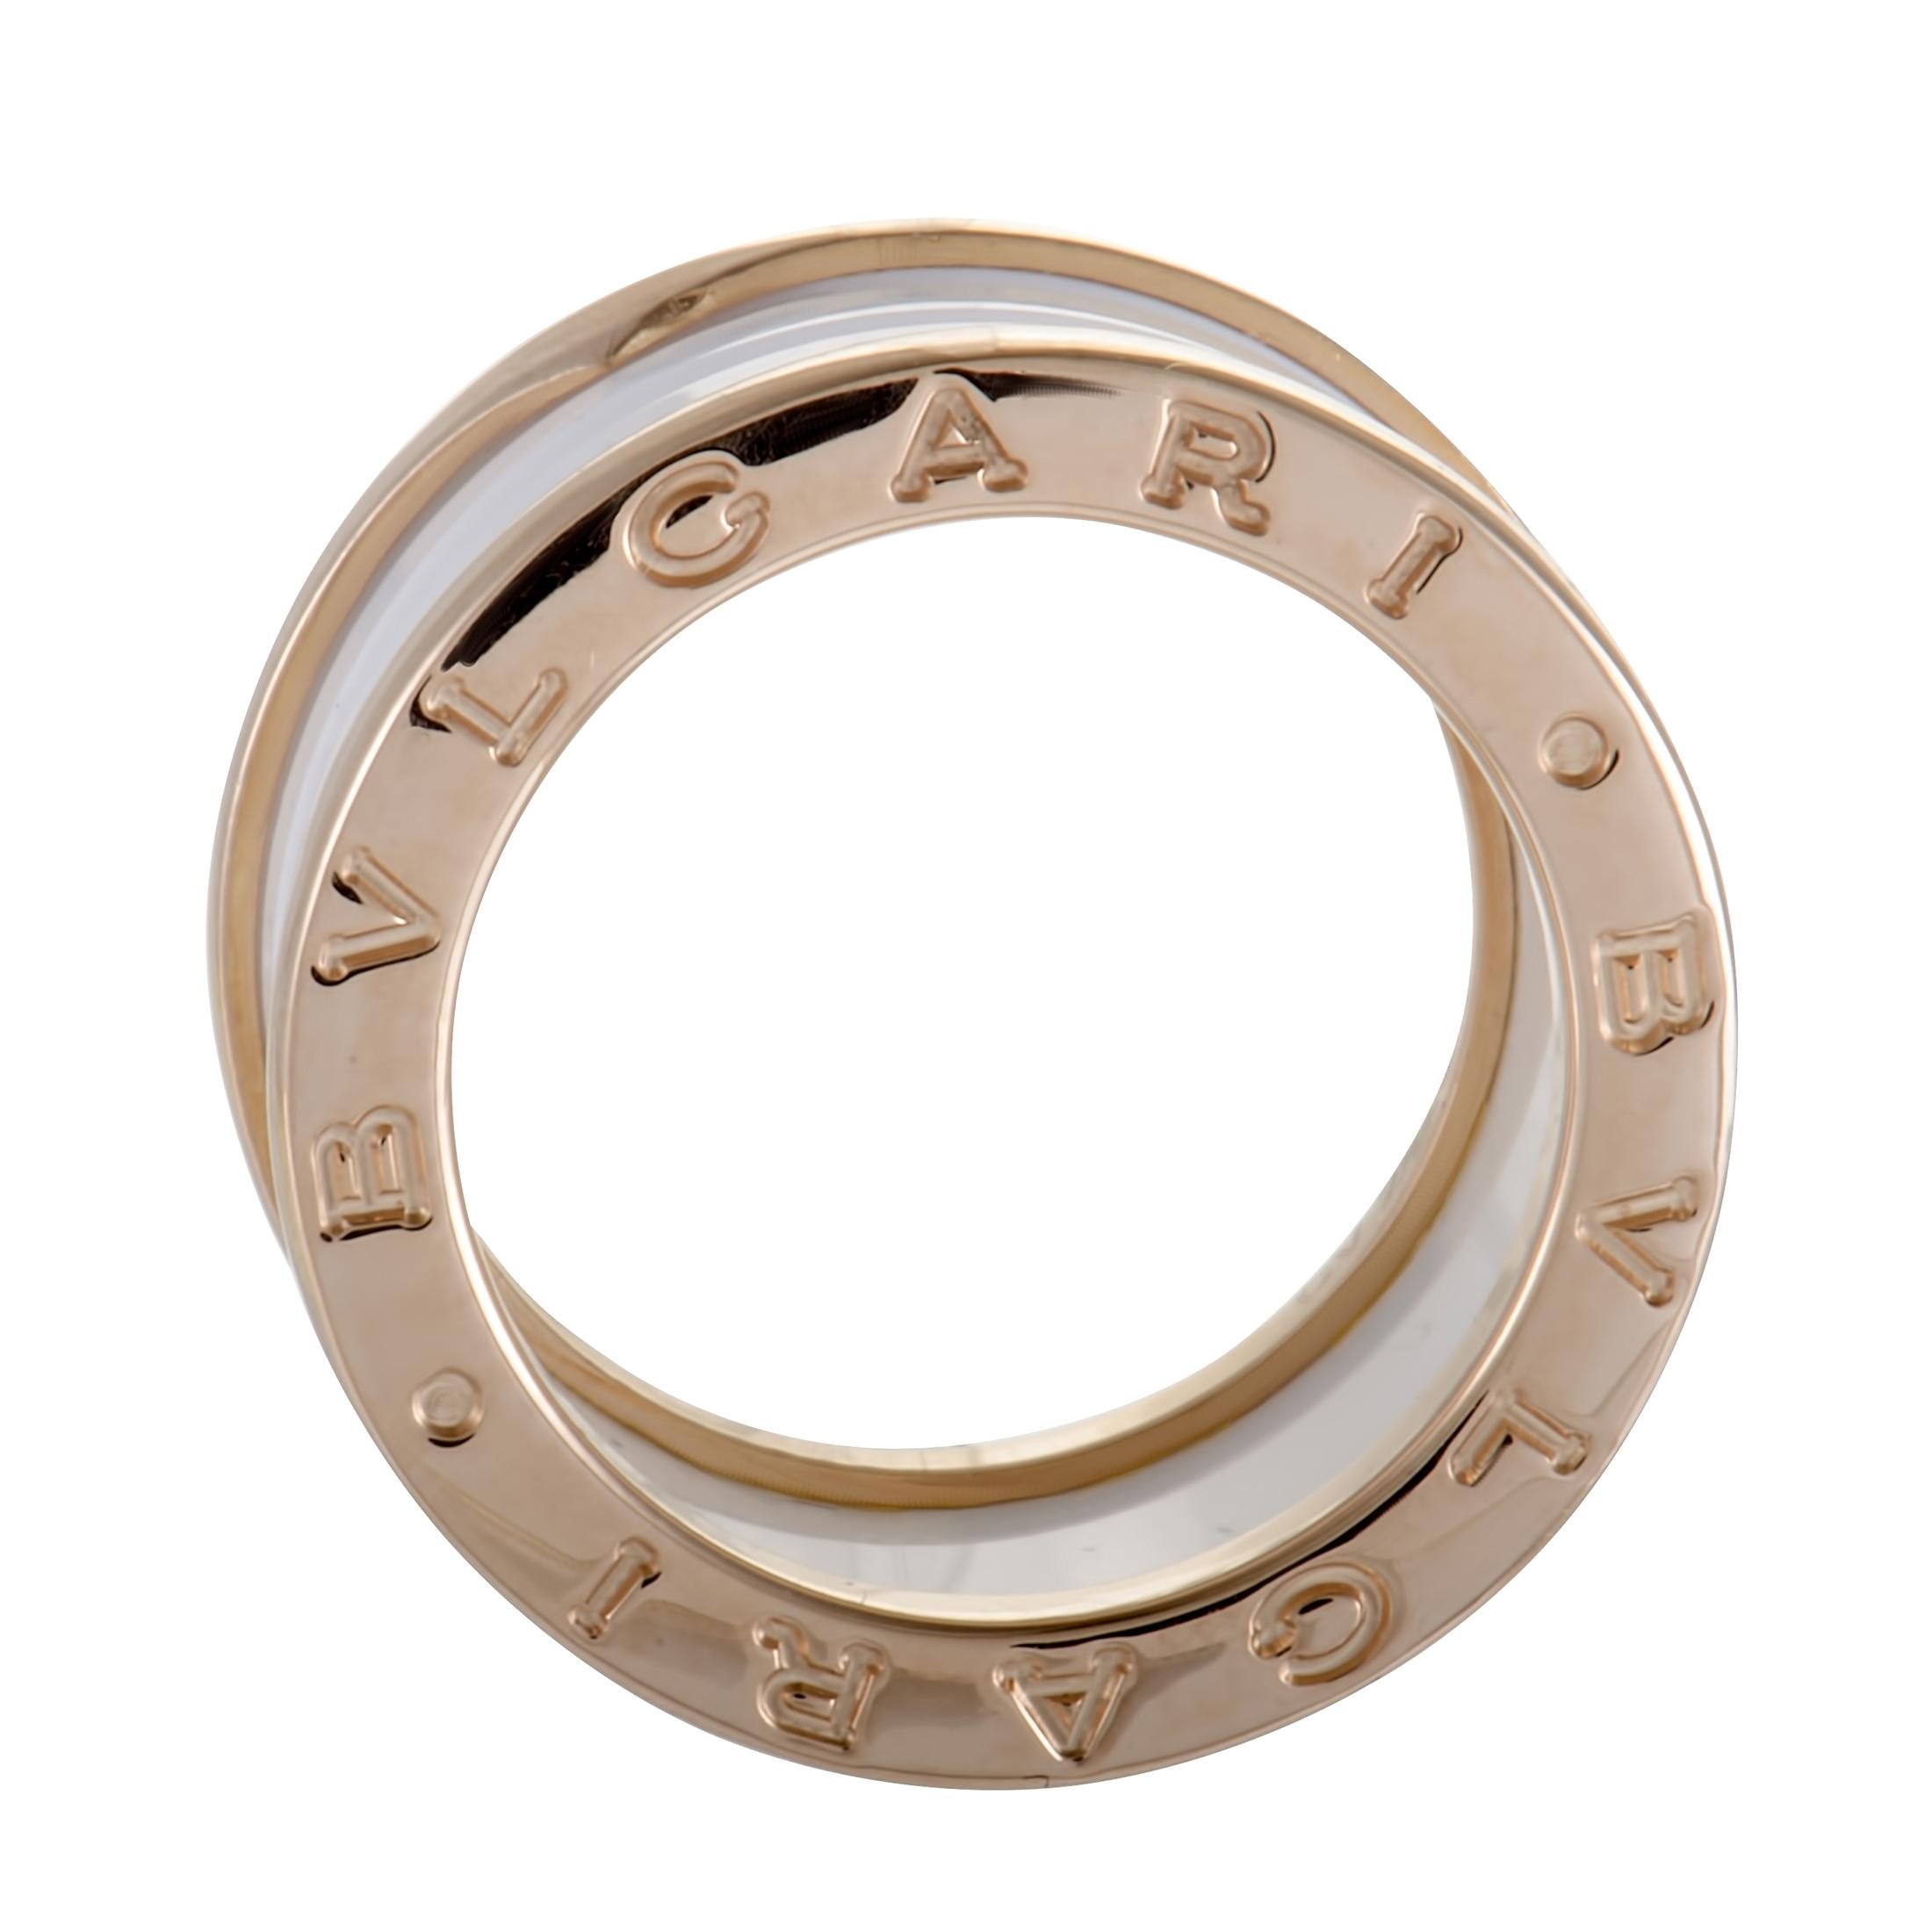 Chic and class are exhibited in this incredible 18K rose gold ring by Bvlgari. Its unique design consists of white ceramic that has 2 rose gold rings on both sides. This is truly a one-of-a-kind ring that will glam up any hand it's worn on.
Ring